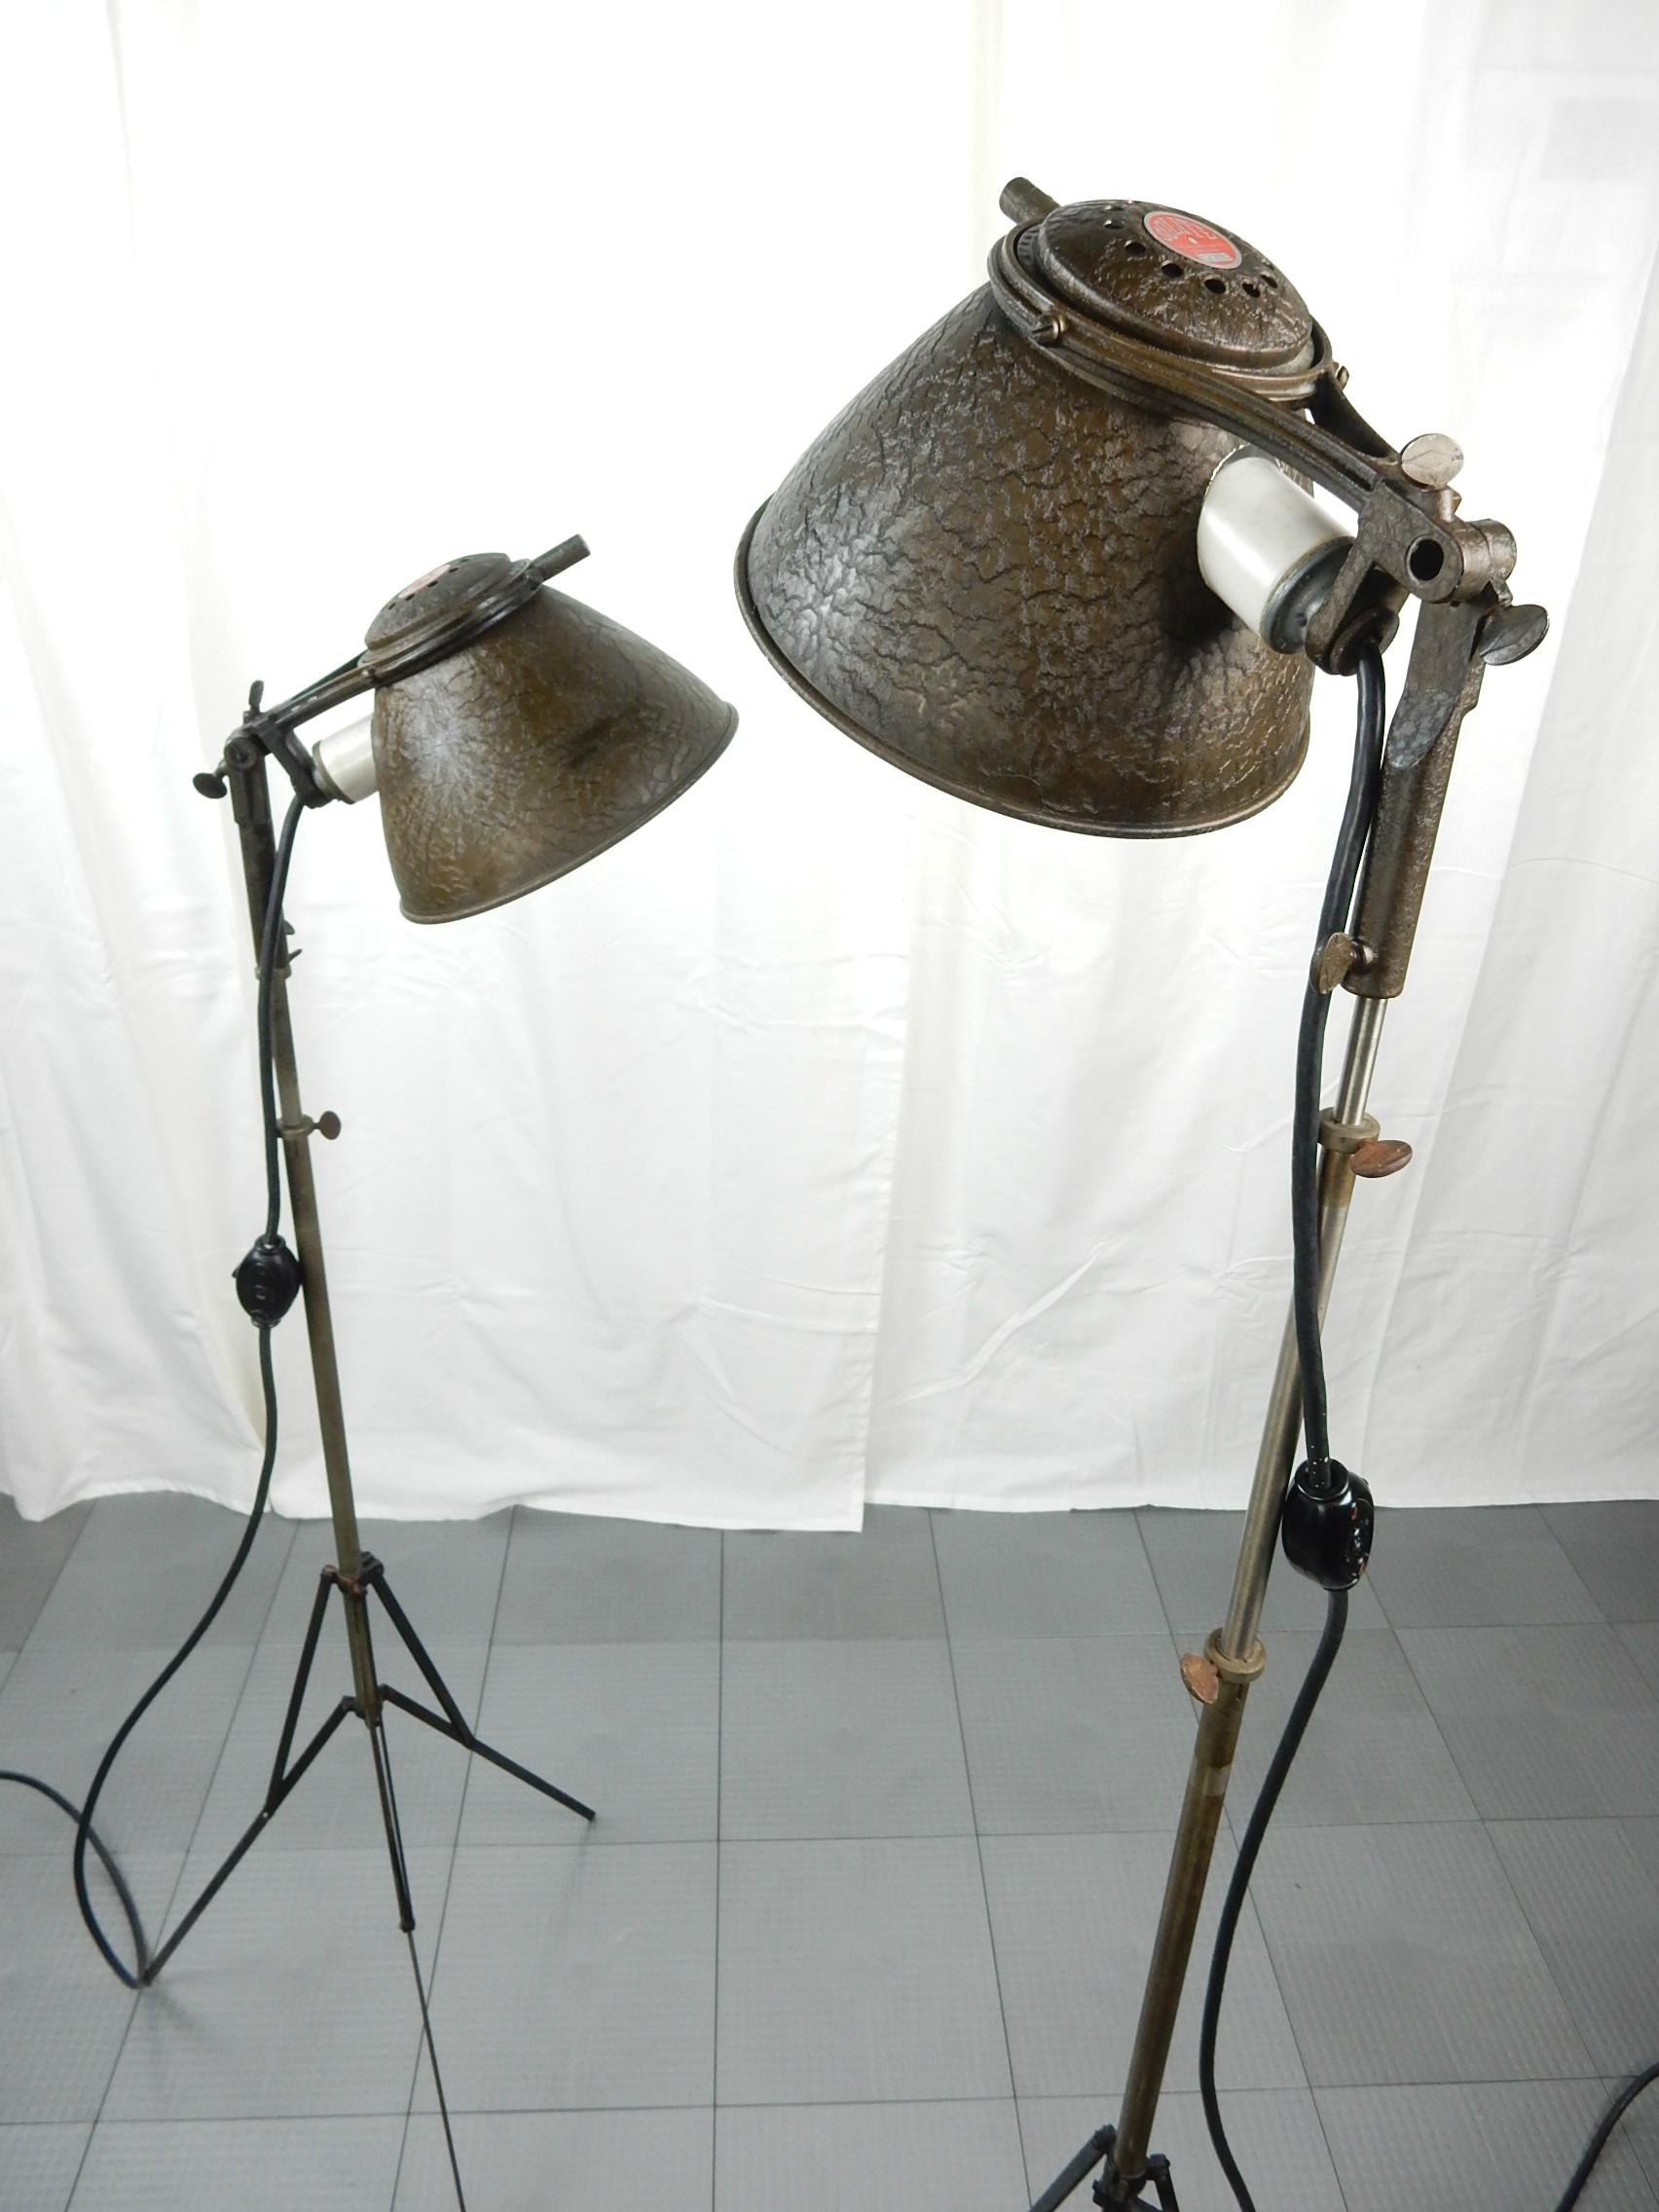 Pair of amazing 1930s Industrial spot floor lamps. 
Fully adjustable height and luminary direction. 
Each features wing nuts, alligator crackle finish on shades/arms, porcelain sockets and a large Bakelite GE switch on cord.
They adjust from